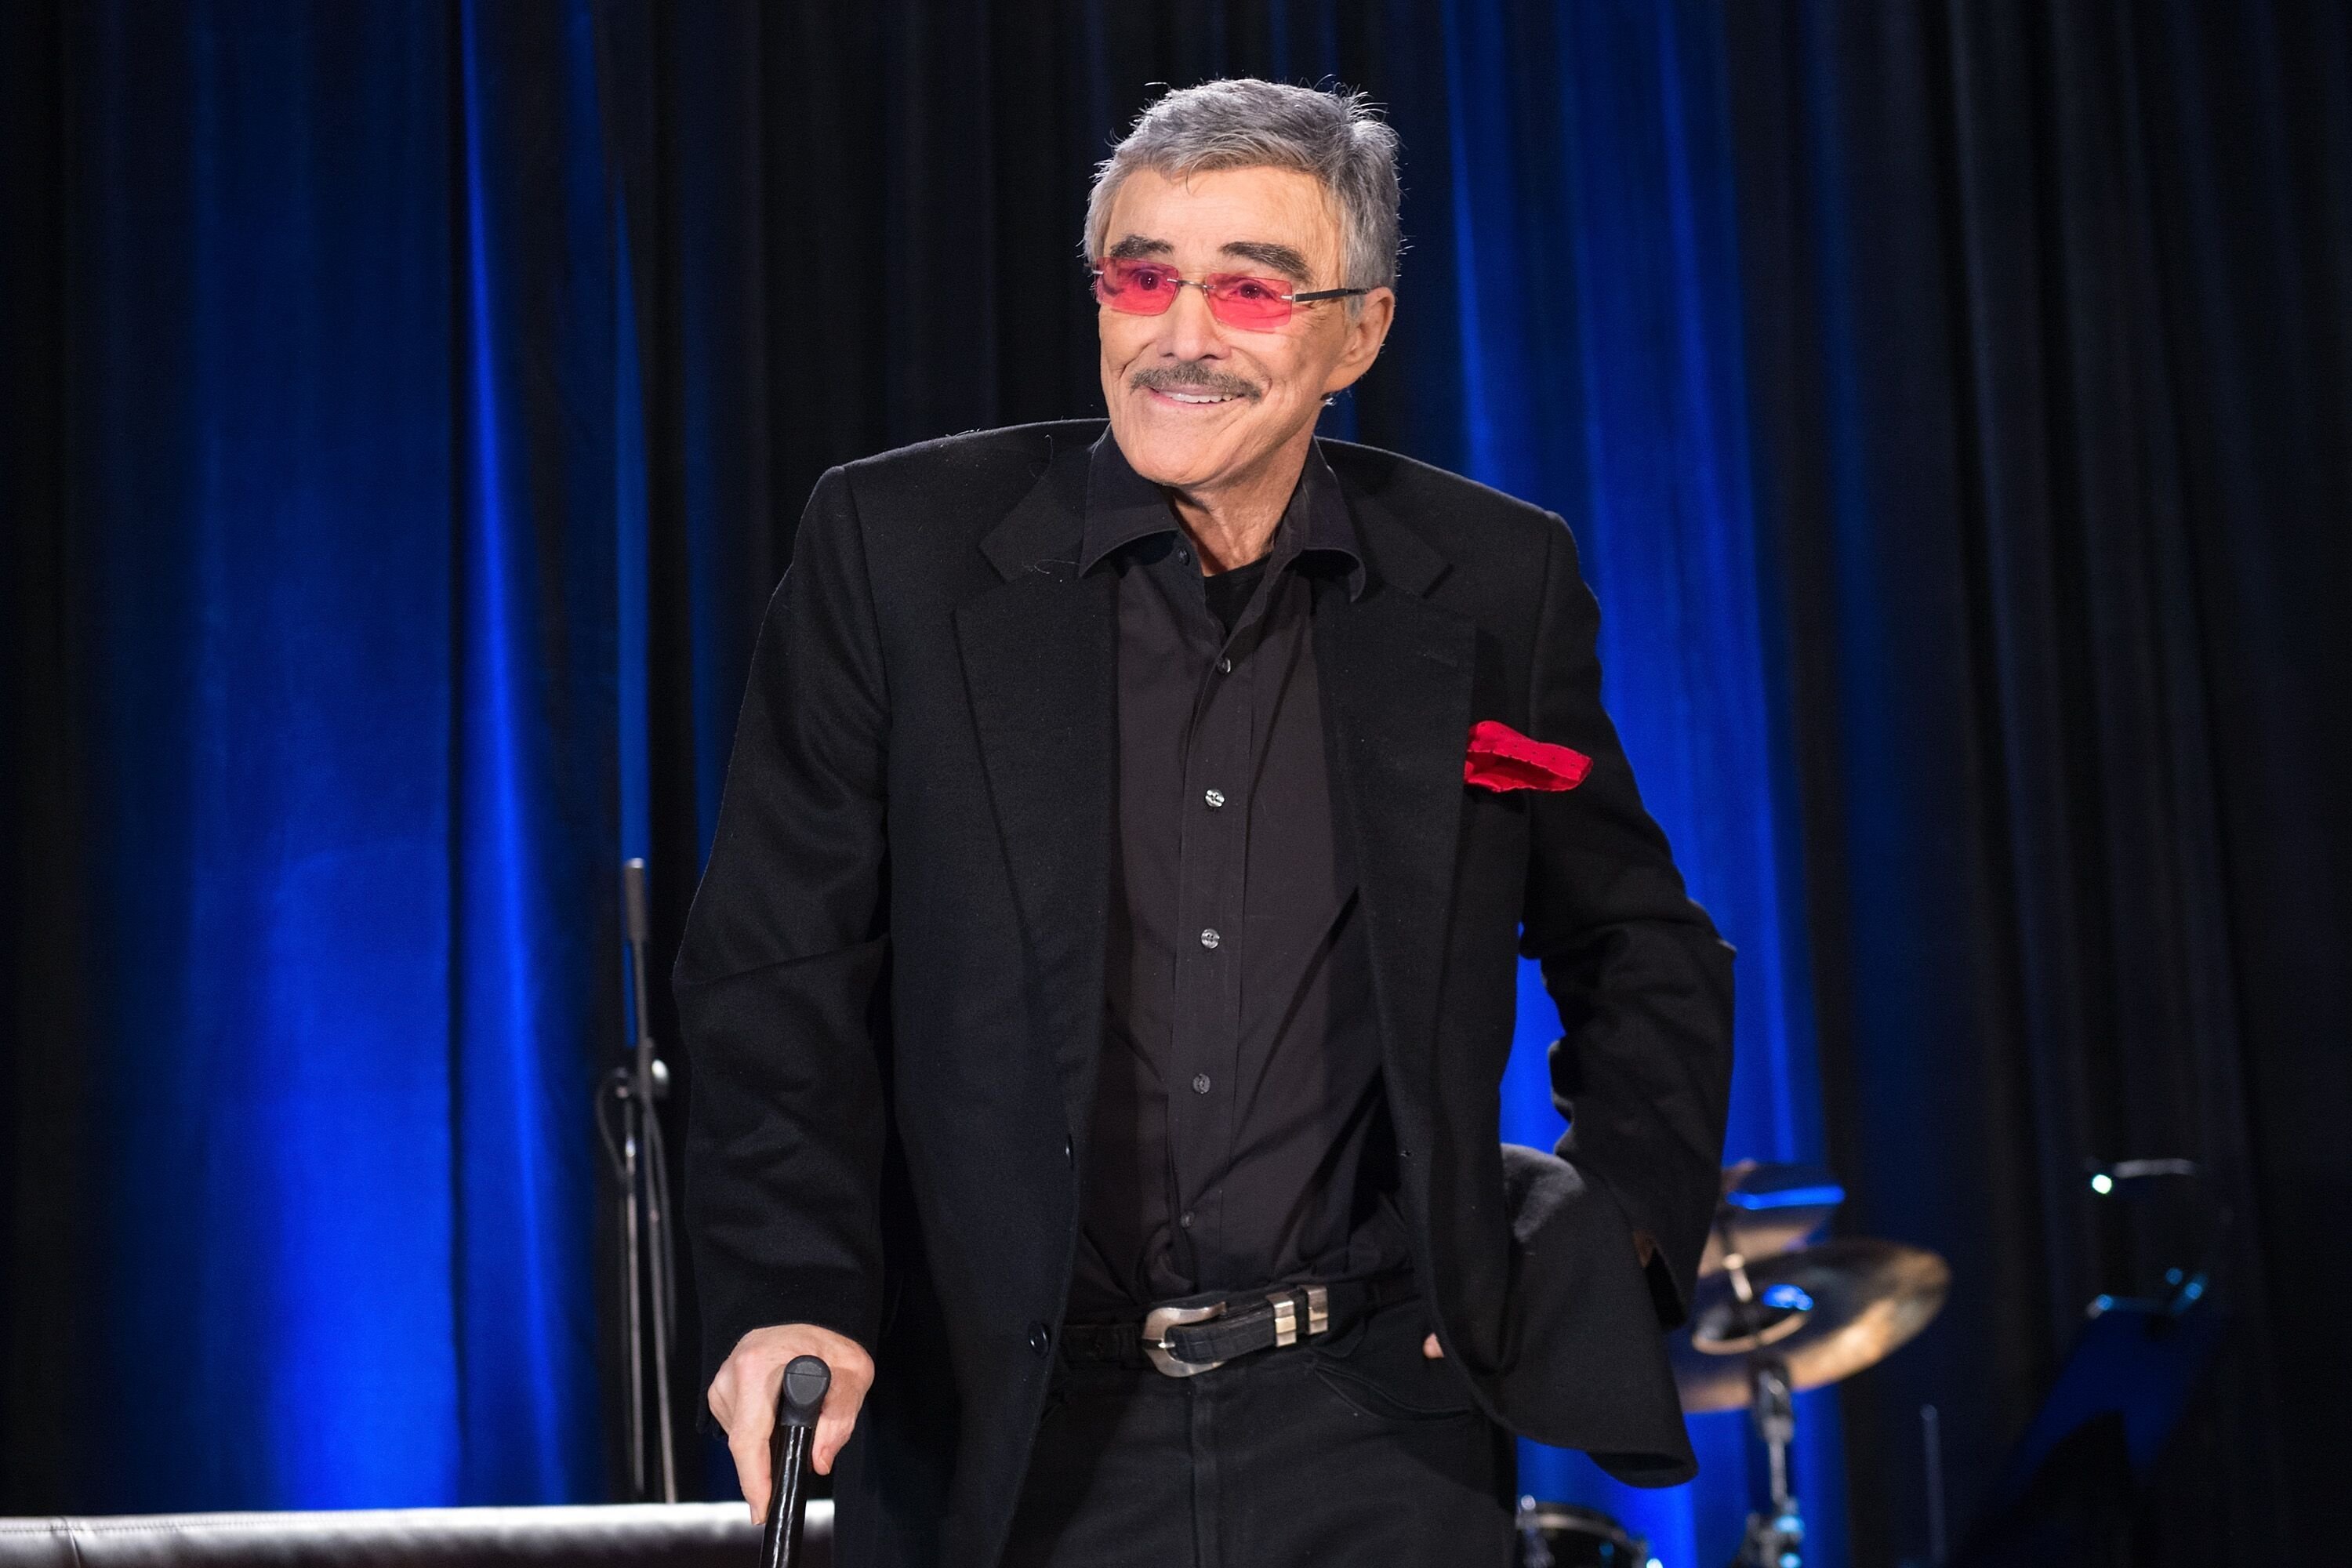 Burt Reynolds attends Wizard World Comic Con Chicago. | Source: Getty Images